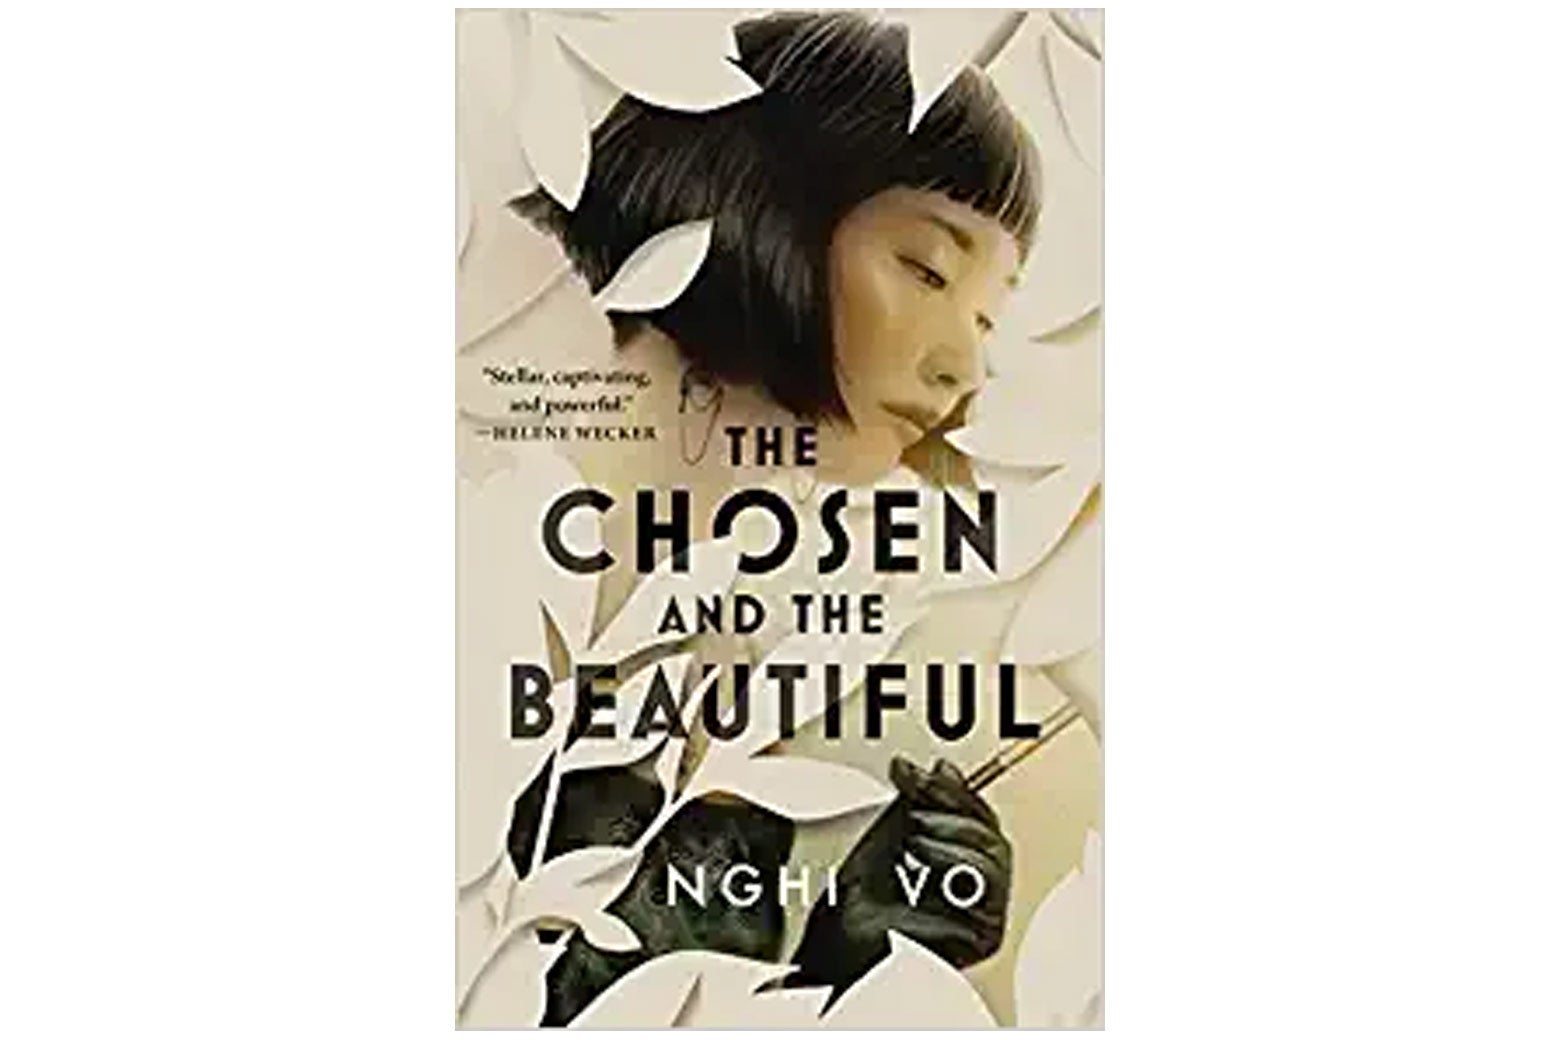 The cover of The Chosen and the Beautiful.